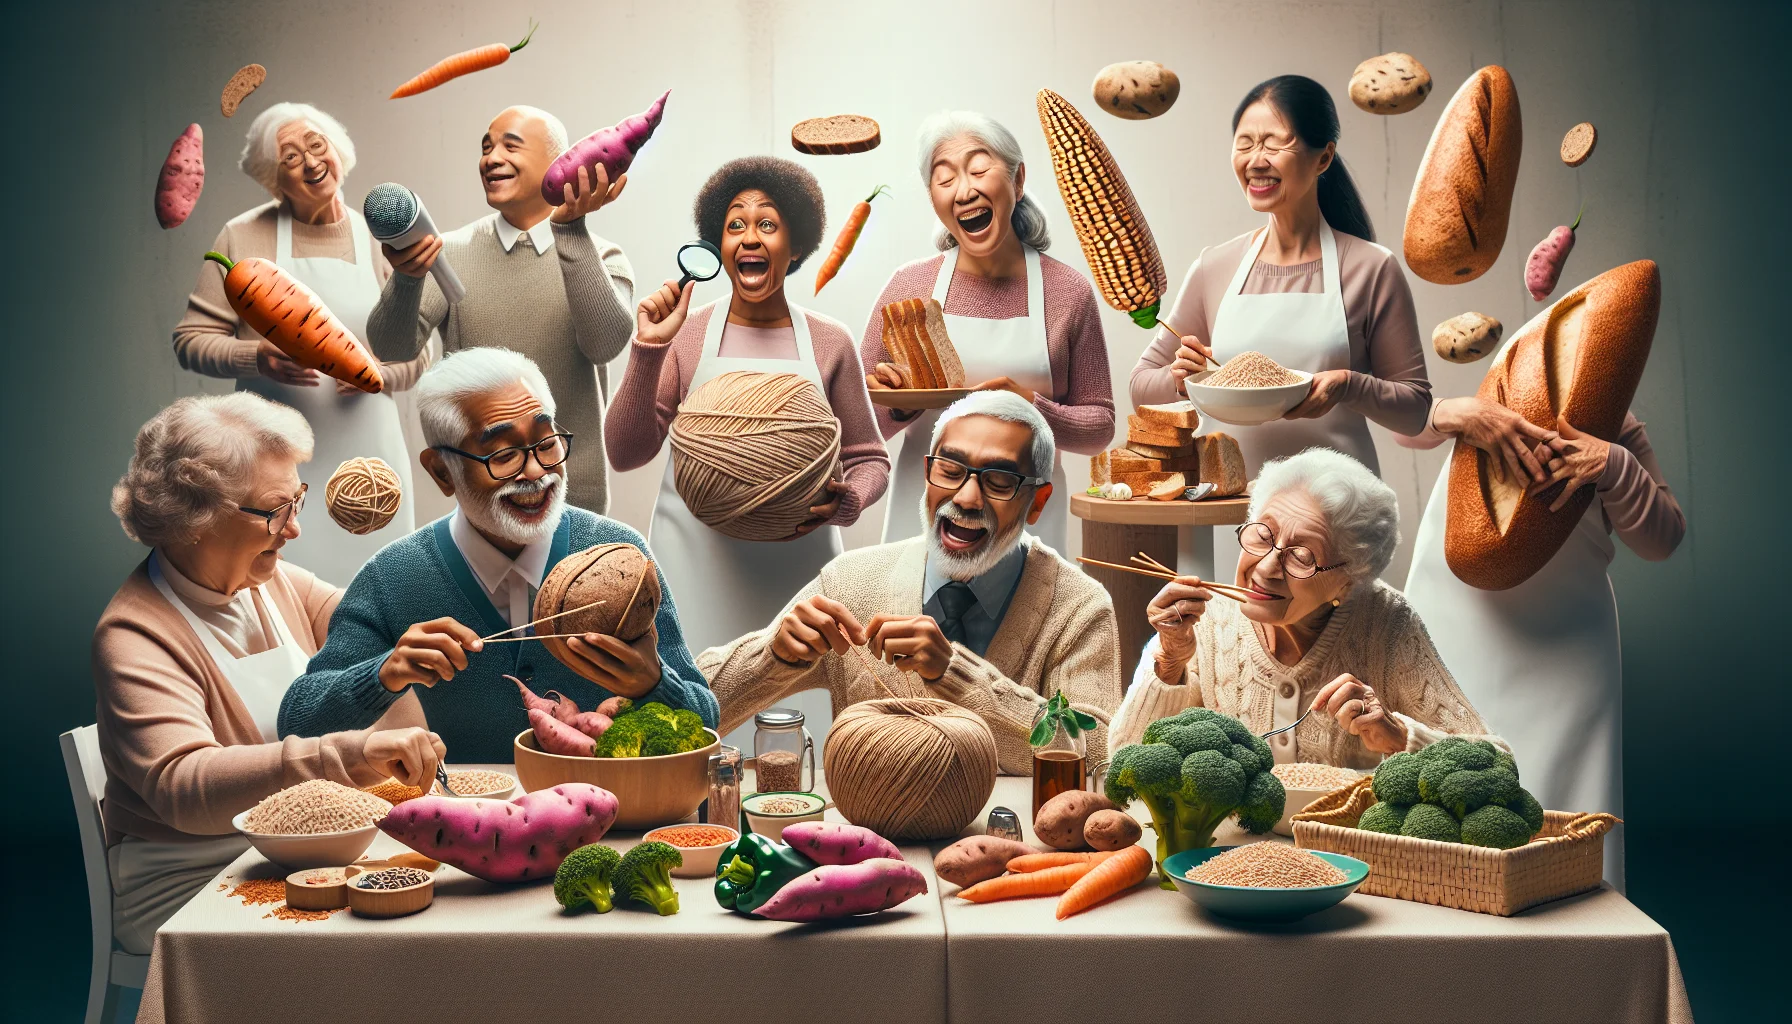 Craft a hilarious and realistic image featuring an array of low-glycemic, high fiber foods such as whole grain bread, brown rice, sweet potatoes, and broccoli. In the centre of the scene, depict a group of elderly people engaging in an animated discussion about their diets. Show a man of South Asian descent playfully juggling a couple of sweet potatoes, while a Hispanic woman is pretending her broccoli is a microphone and hosting an imaginary talk show about healthy eating. Elsewhere, a Black man is inspecting a piece of whole grain bread with a magnifying glass, and a Caucasian elderly woman crossing wholewheat pasta strands like knitting needles. Everyone should be wearing light-hearted expressions.